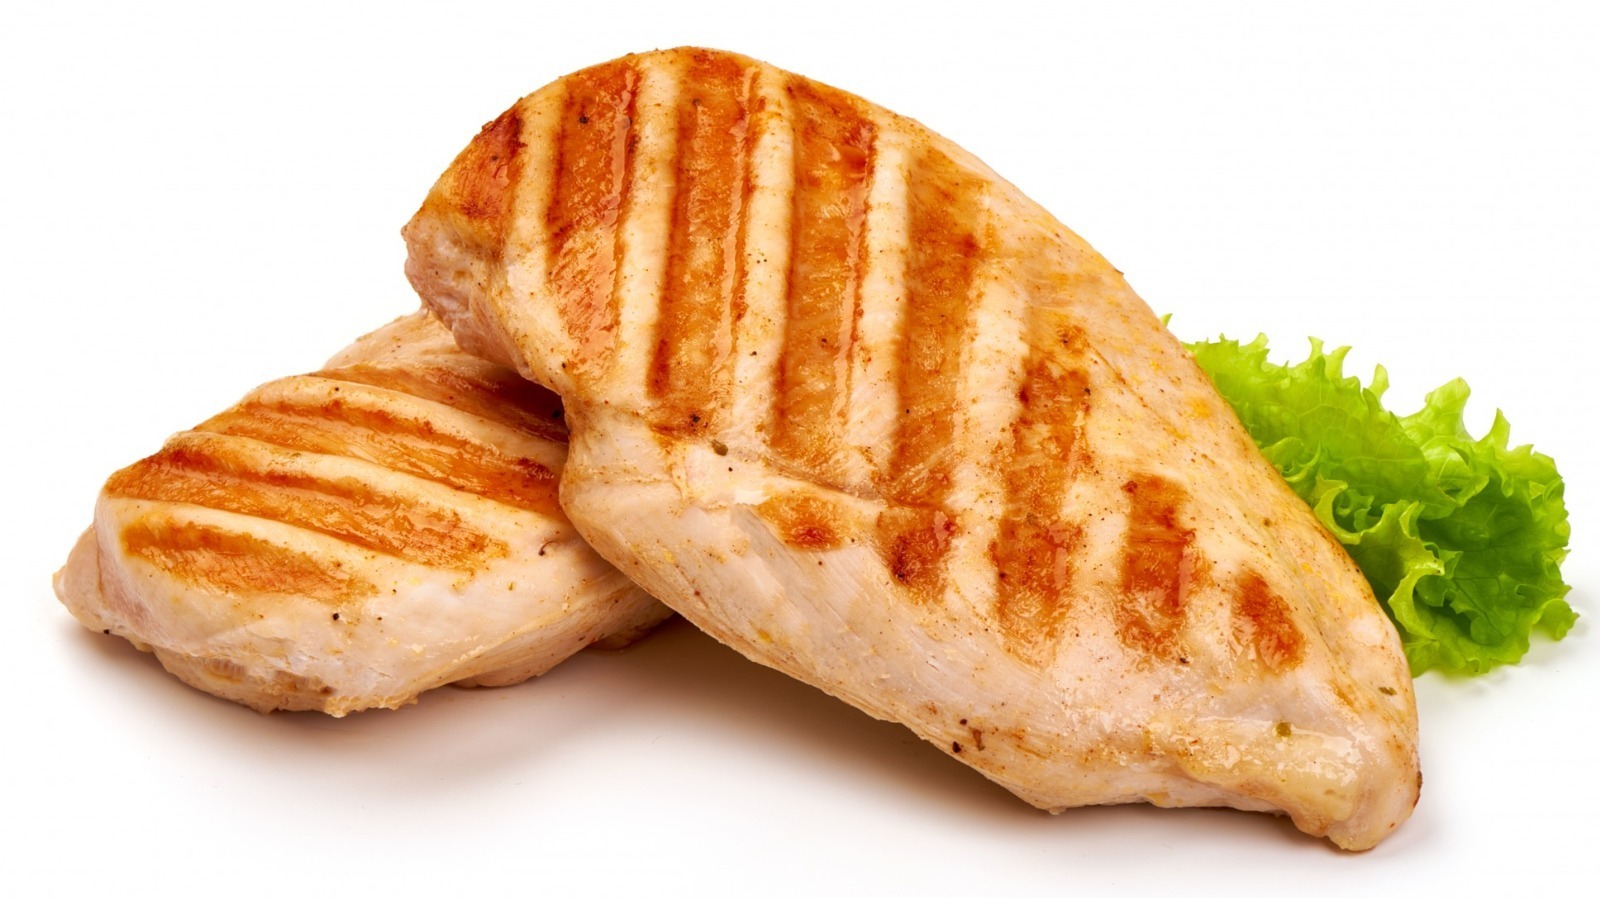 https://www.mashed.com/img/gallery/why-30285-pounds-of-ready-to-eat-chicken-fillets-are-being-recalled/l-intro-1651427650.jpg